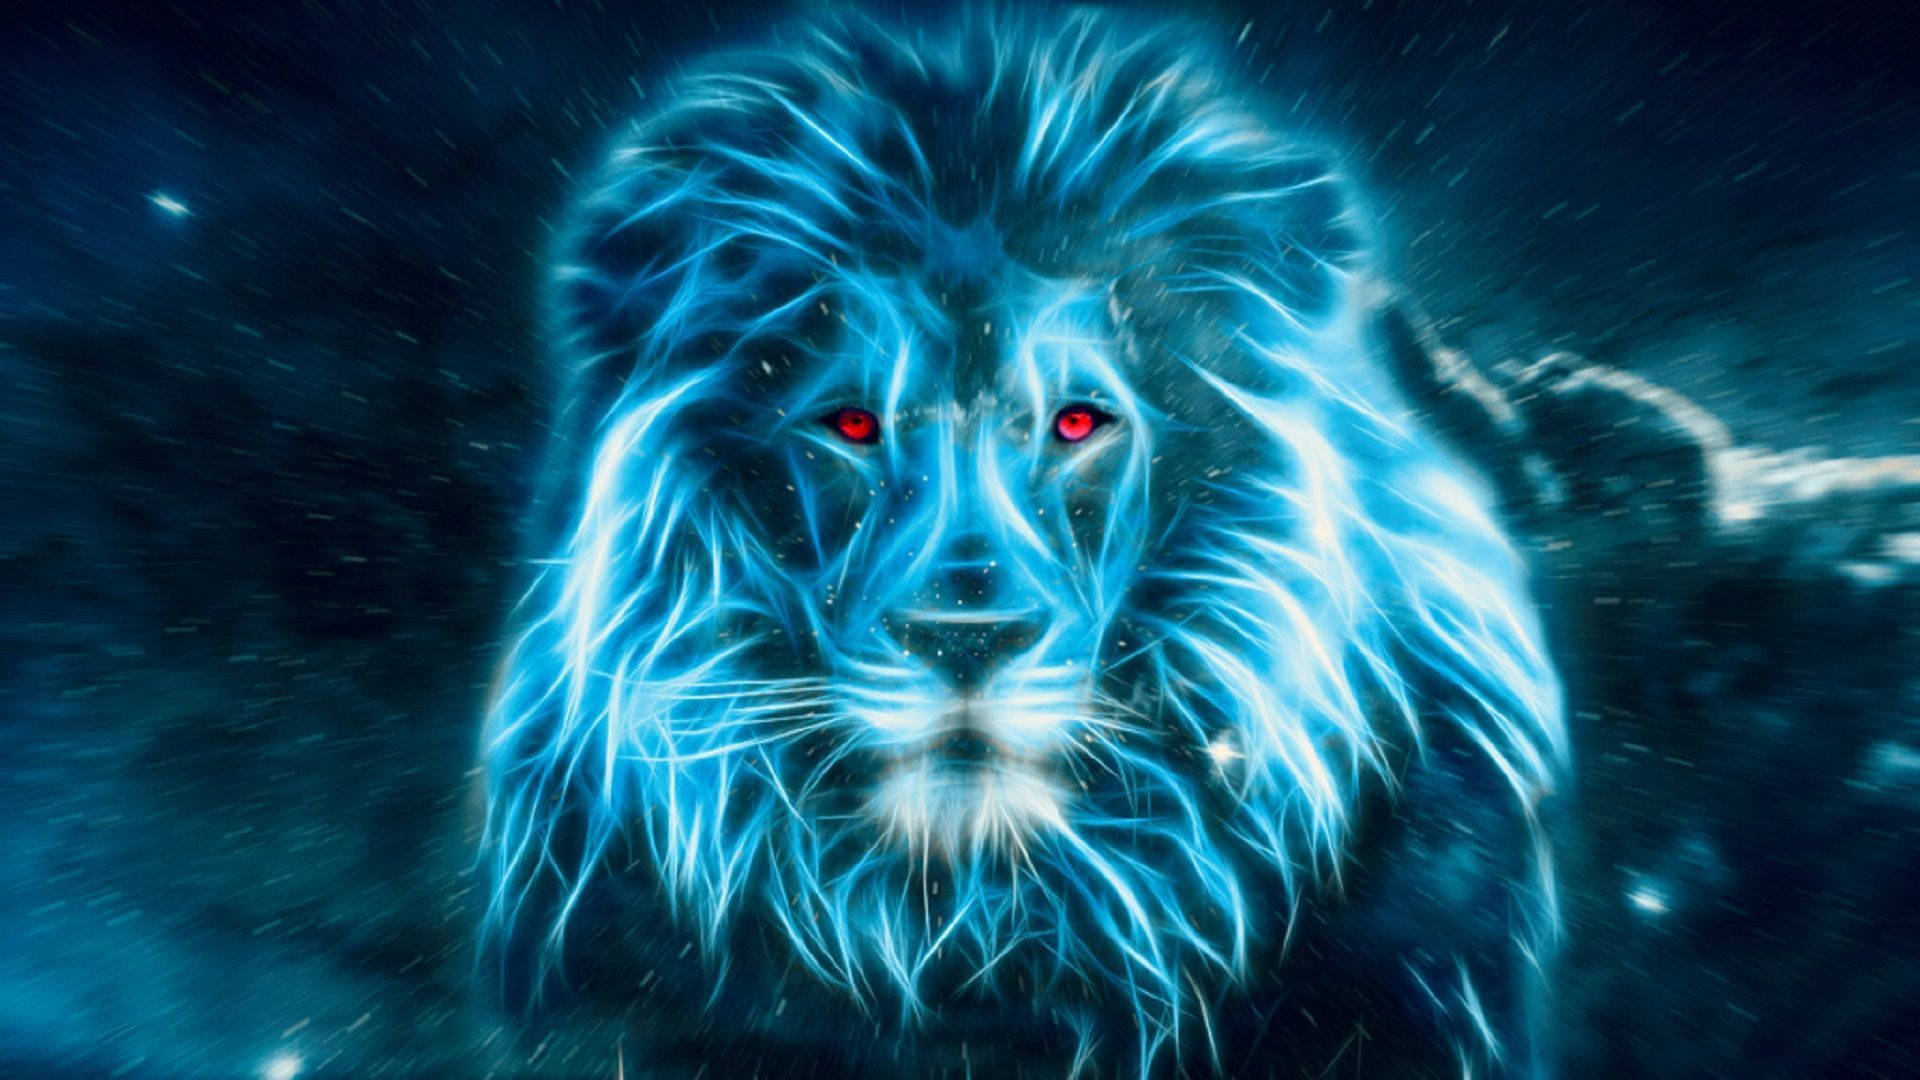 Free 3d Lion Wallpaper Downloads, [100+] 3d Lion Wallpapers for FREE |  